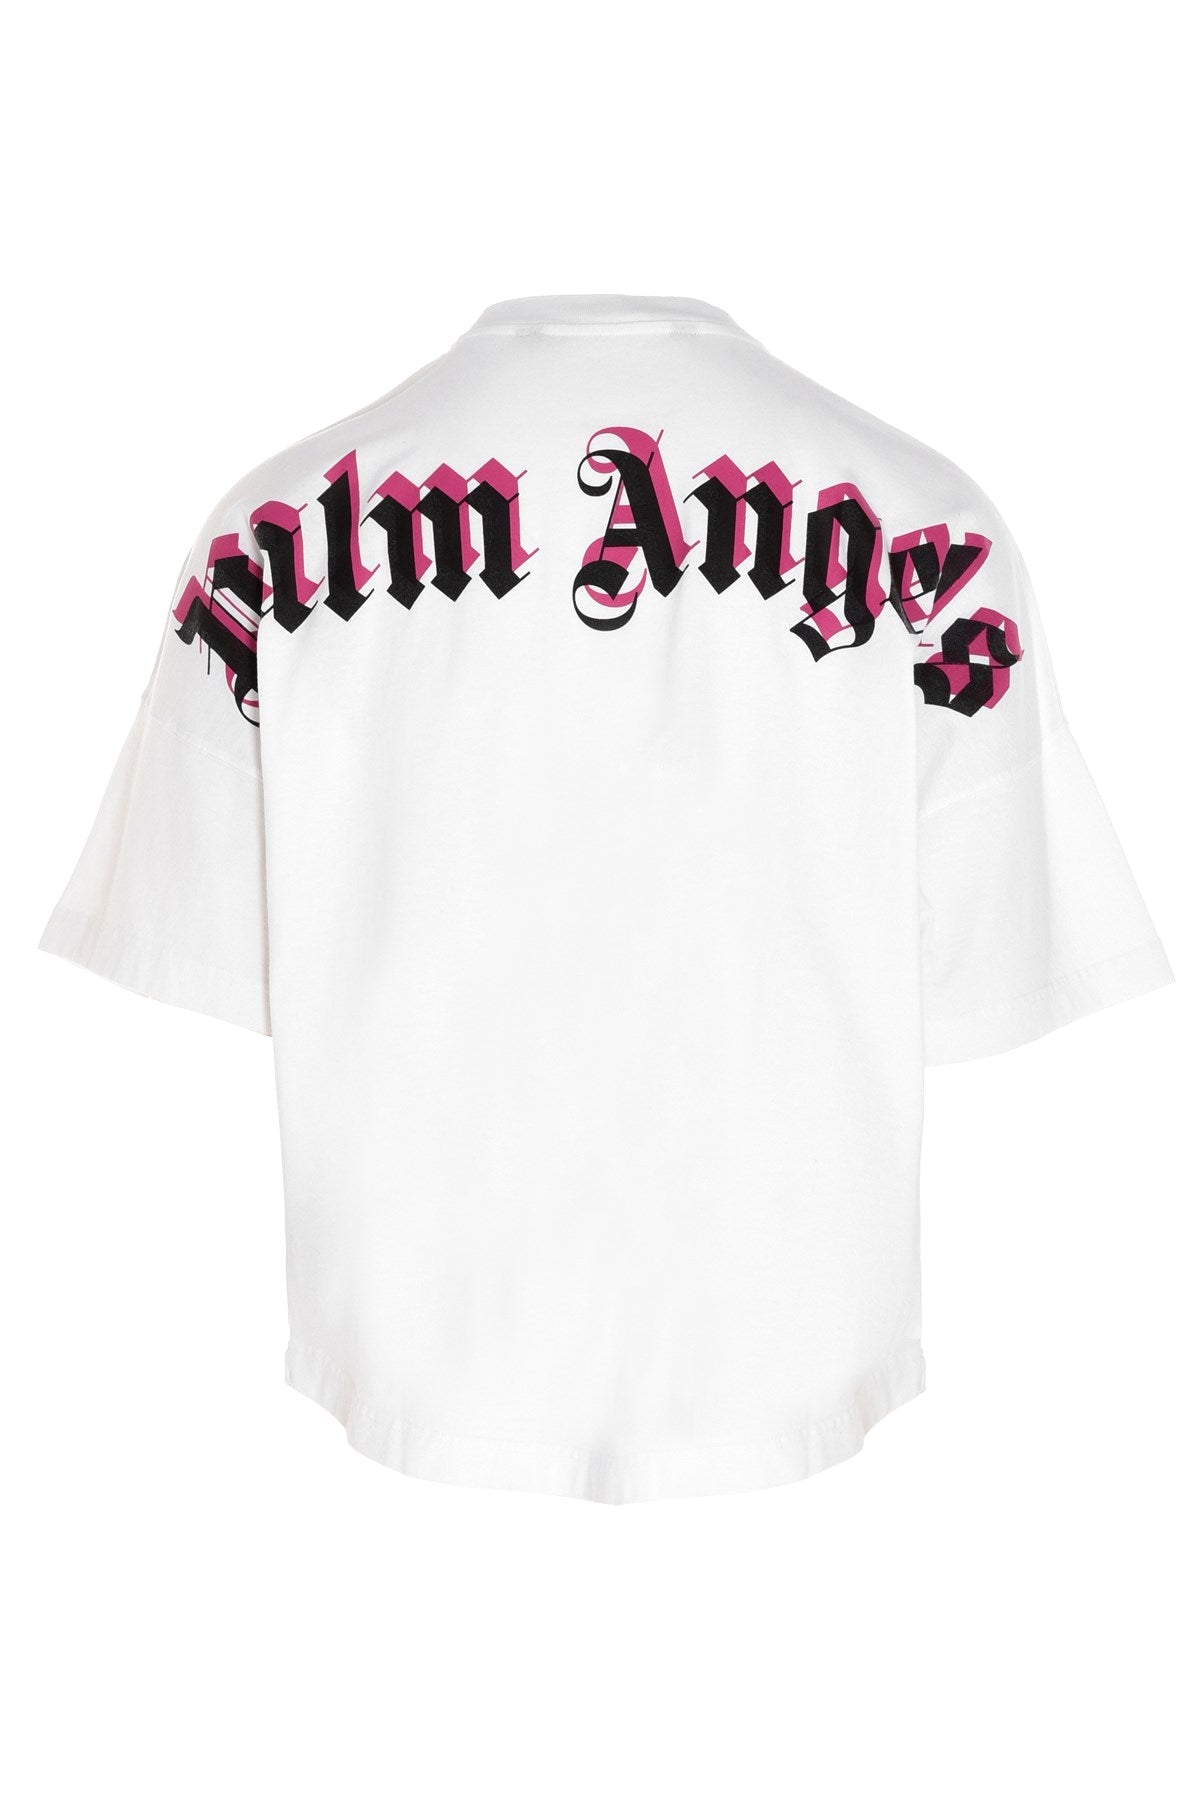 Palm Angels White with black/fuchsia logo print Tee - Shop Streetwear, Sneakers, Slippers and Gifts online | Malaysia - The Factory KL